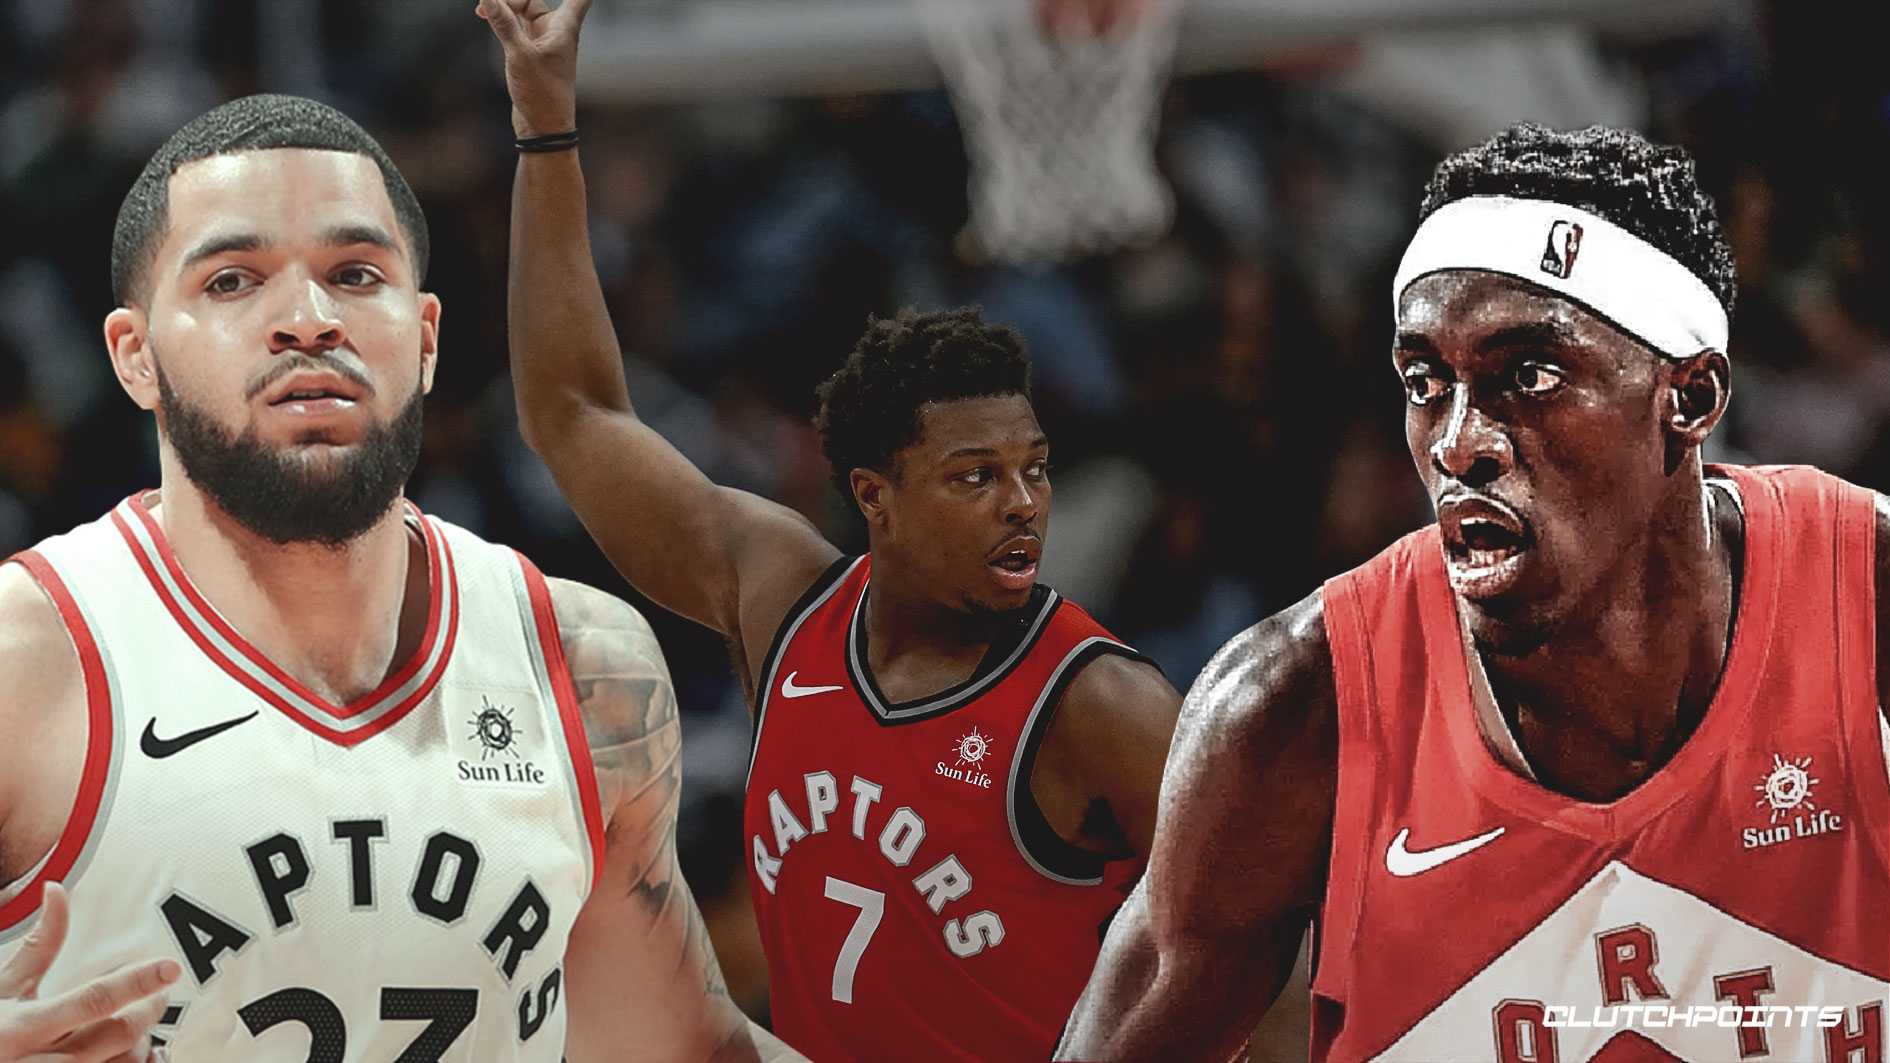  Raptors Playoff Picture